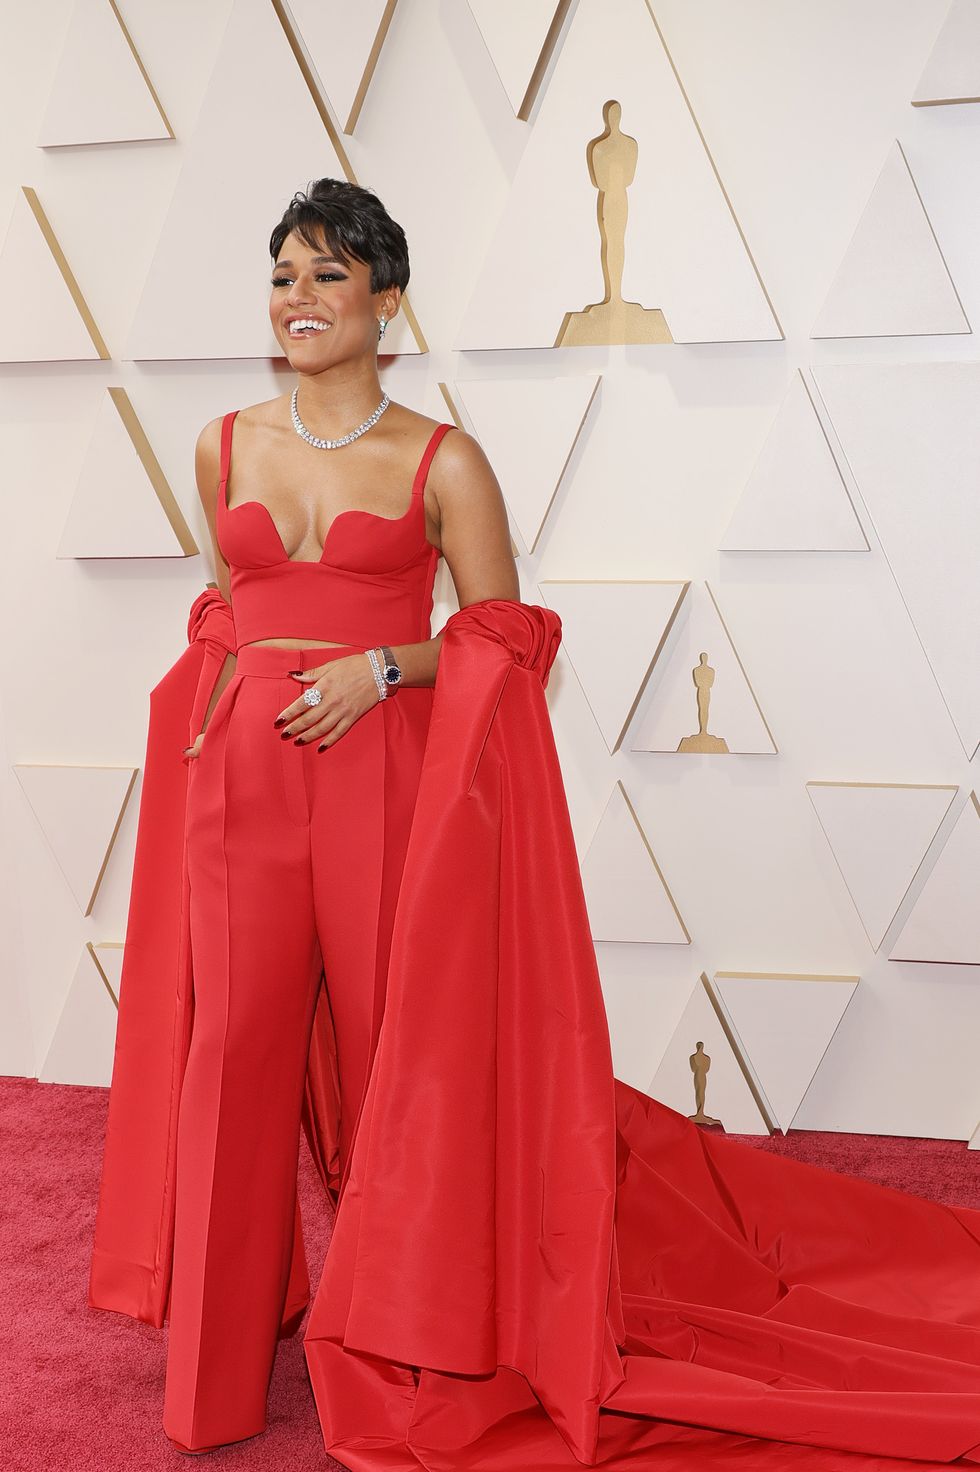 The Best Fashion Moments From the 2022 Oscars